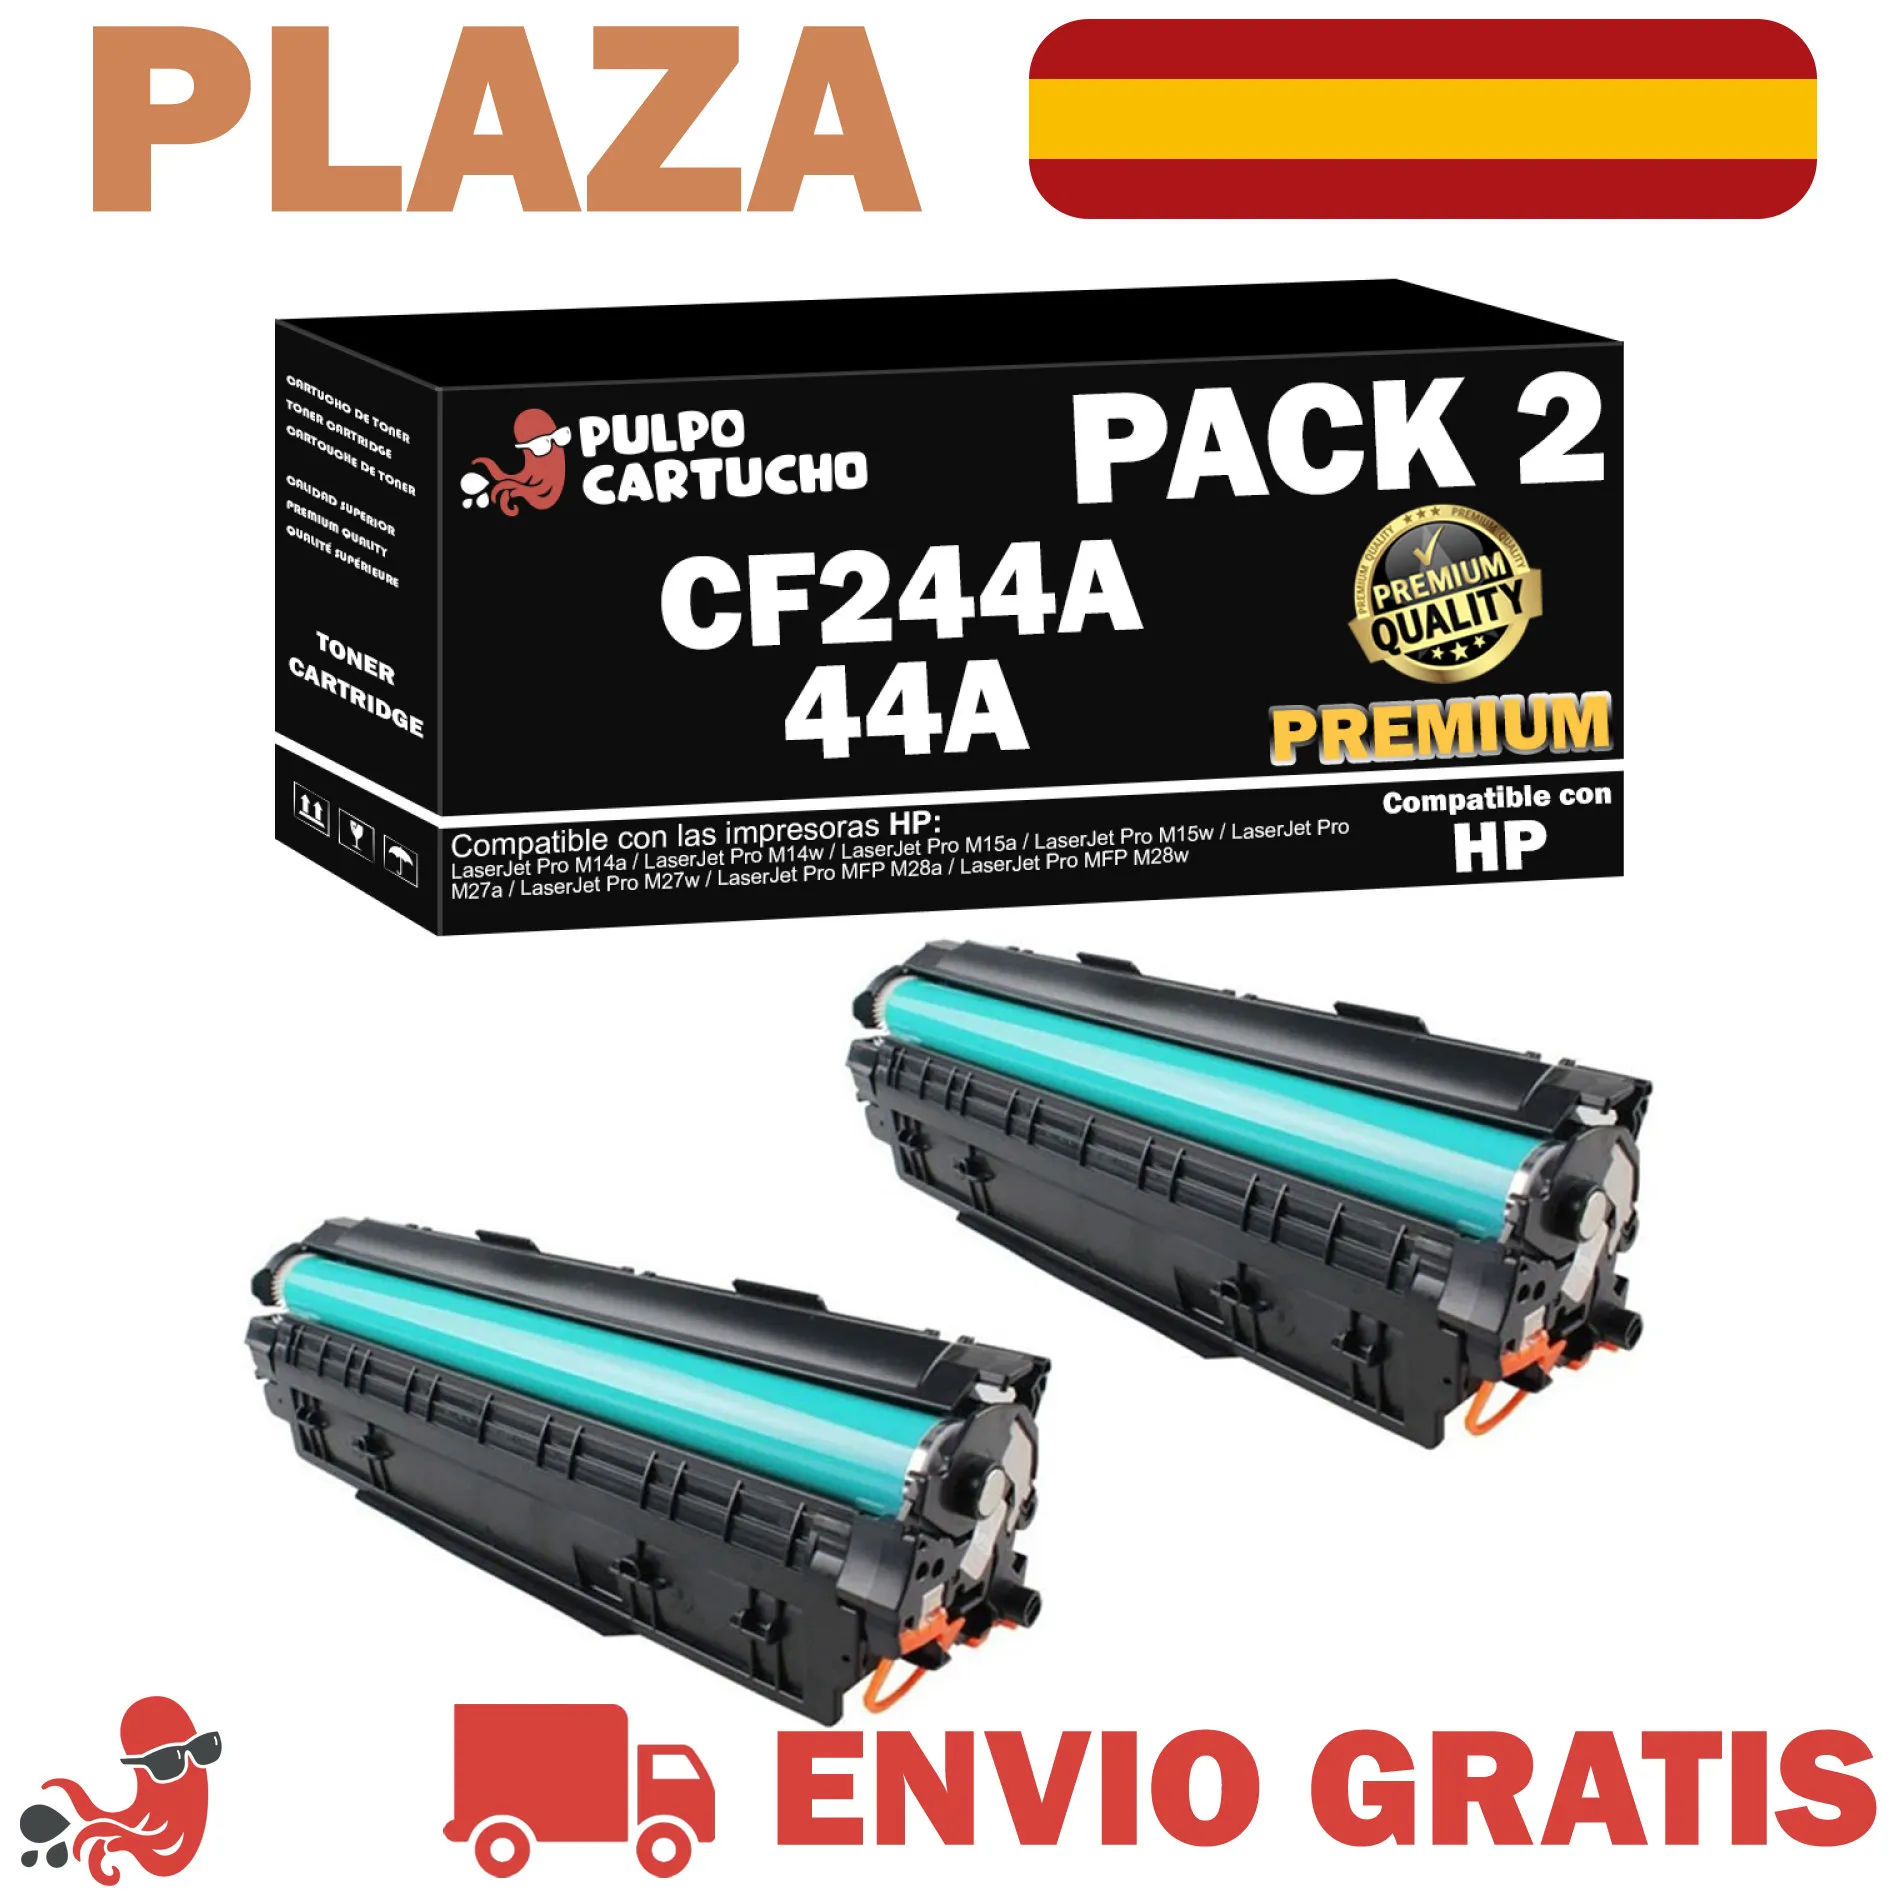 Pack 2 Toner HP CF244A Premium support HP 44A - Non Oem-cartridge LaserJet Pro M14a, M14w, M15a, M27a, M27w, MFP M28a printers MFP M28w-generator consumable printer-capacity 2x1.000 pages